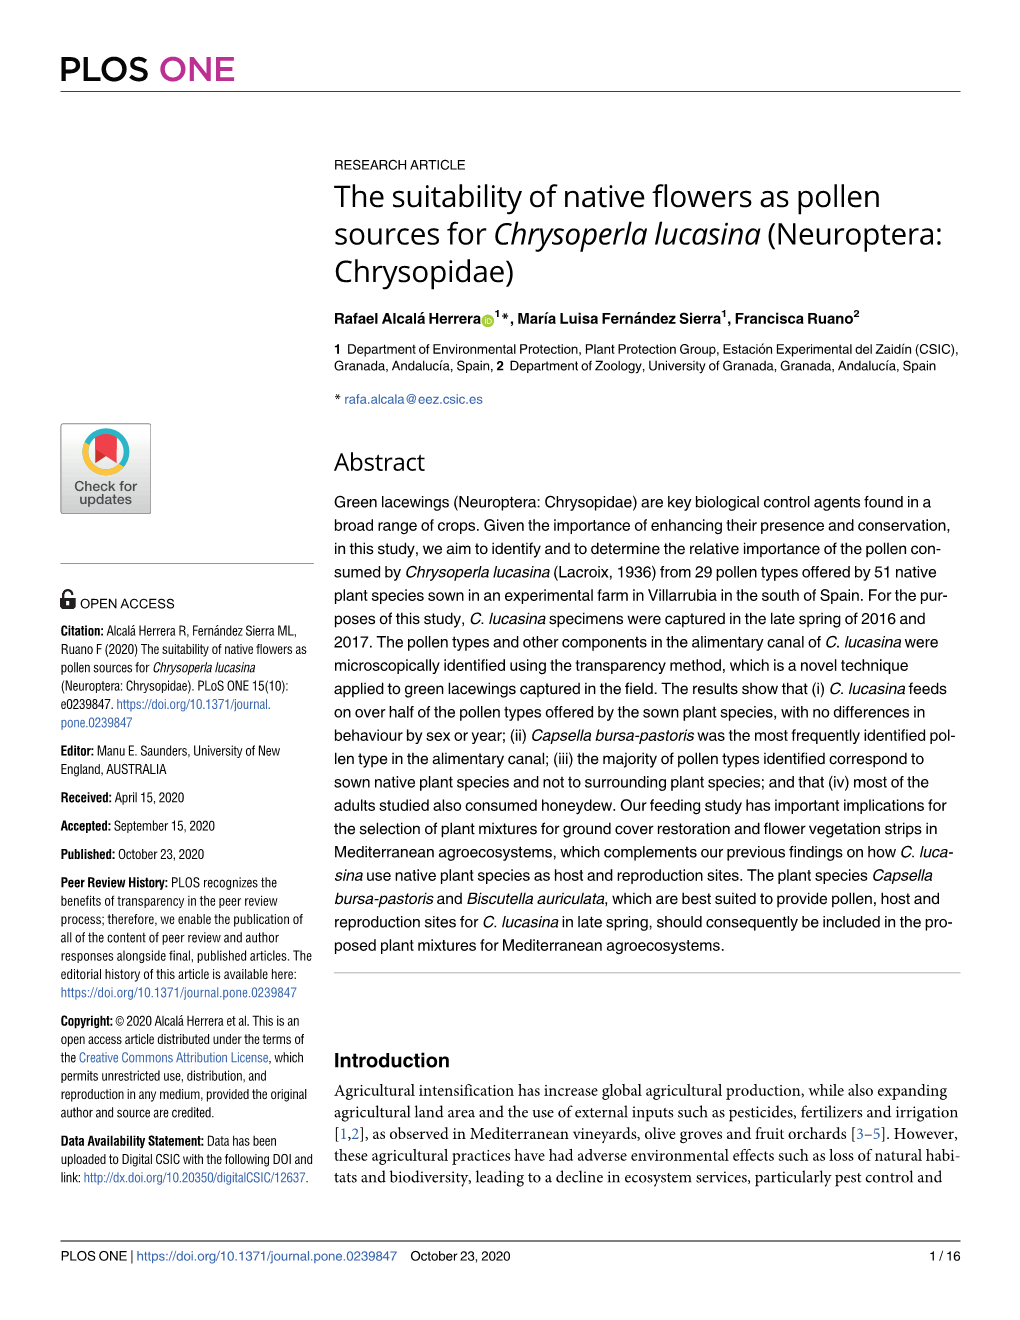 The Suitability of Native Flowers As Pollen Sources for Chrysoperla Lucasina (Neuroptera: Chrysopidae)